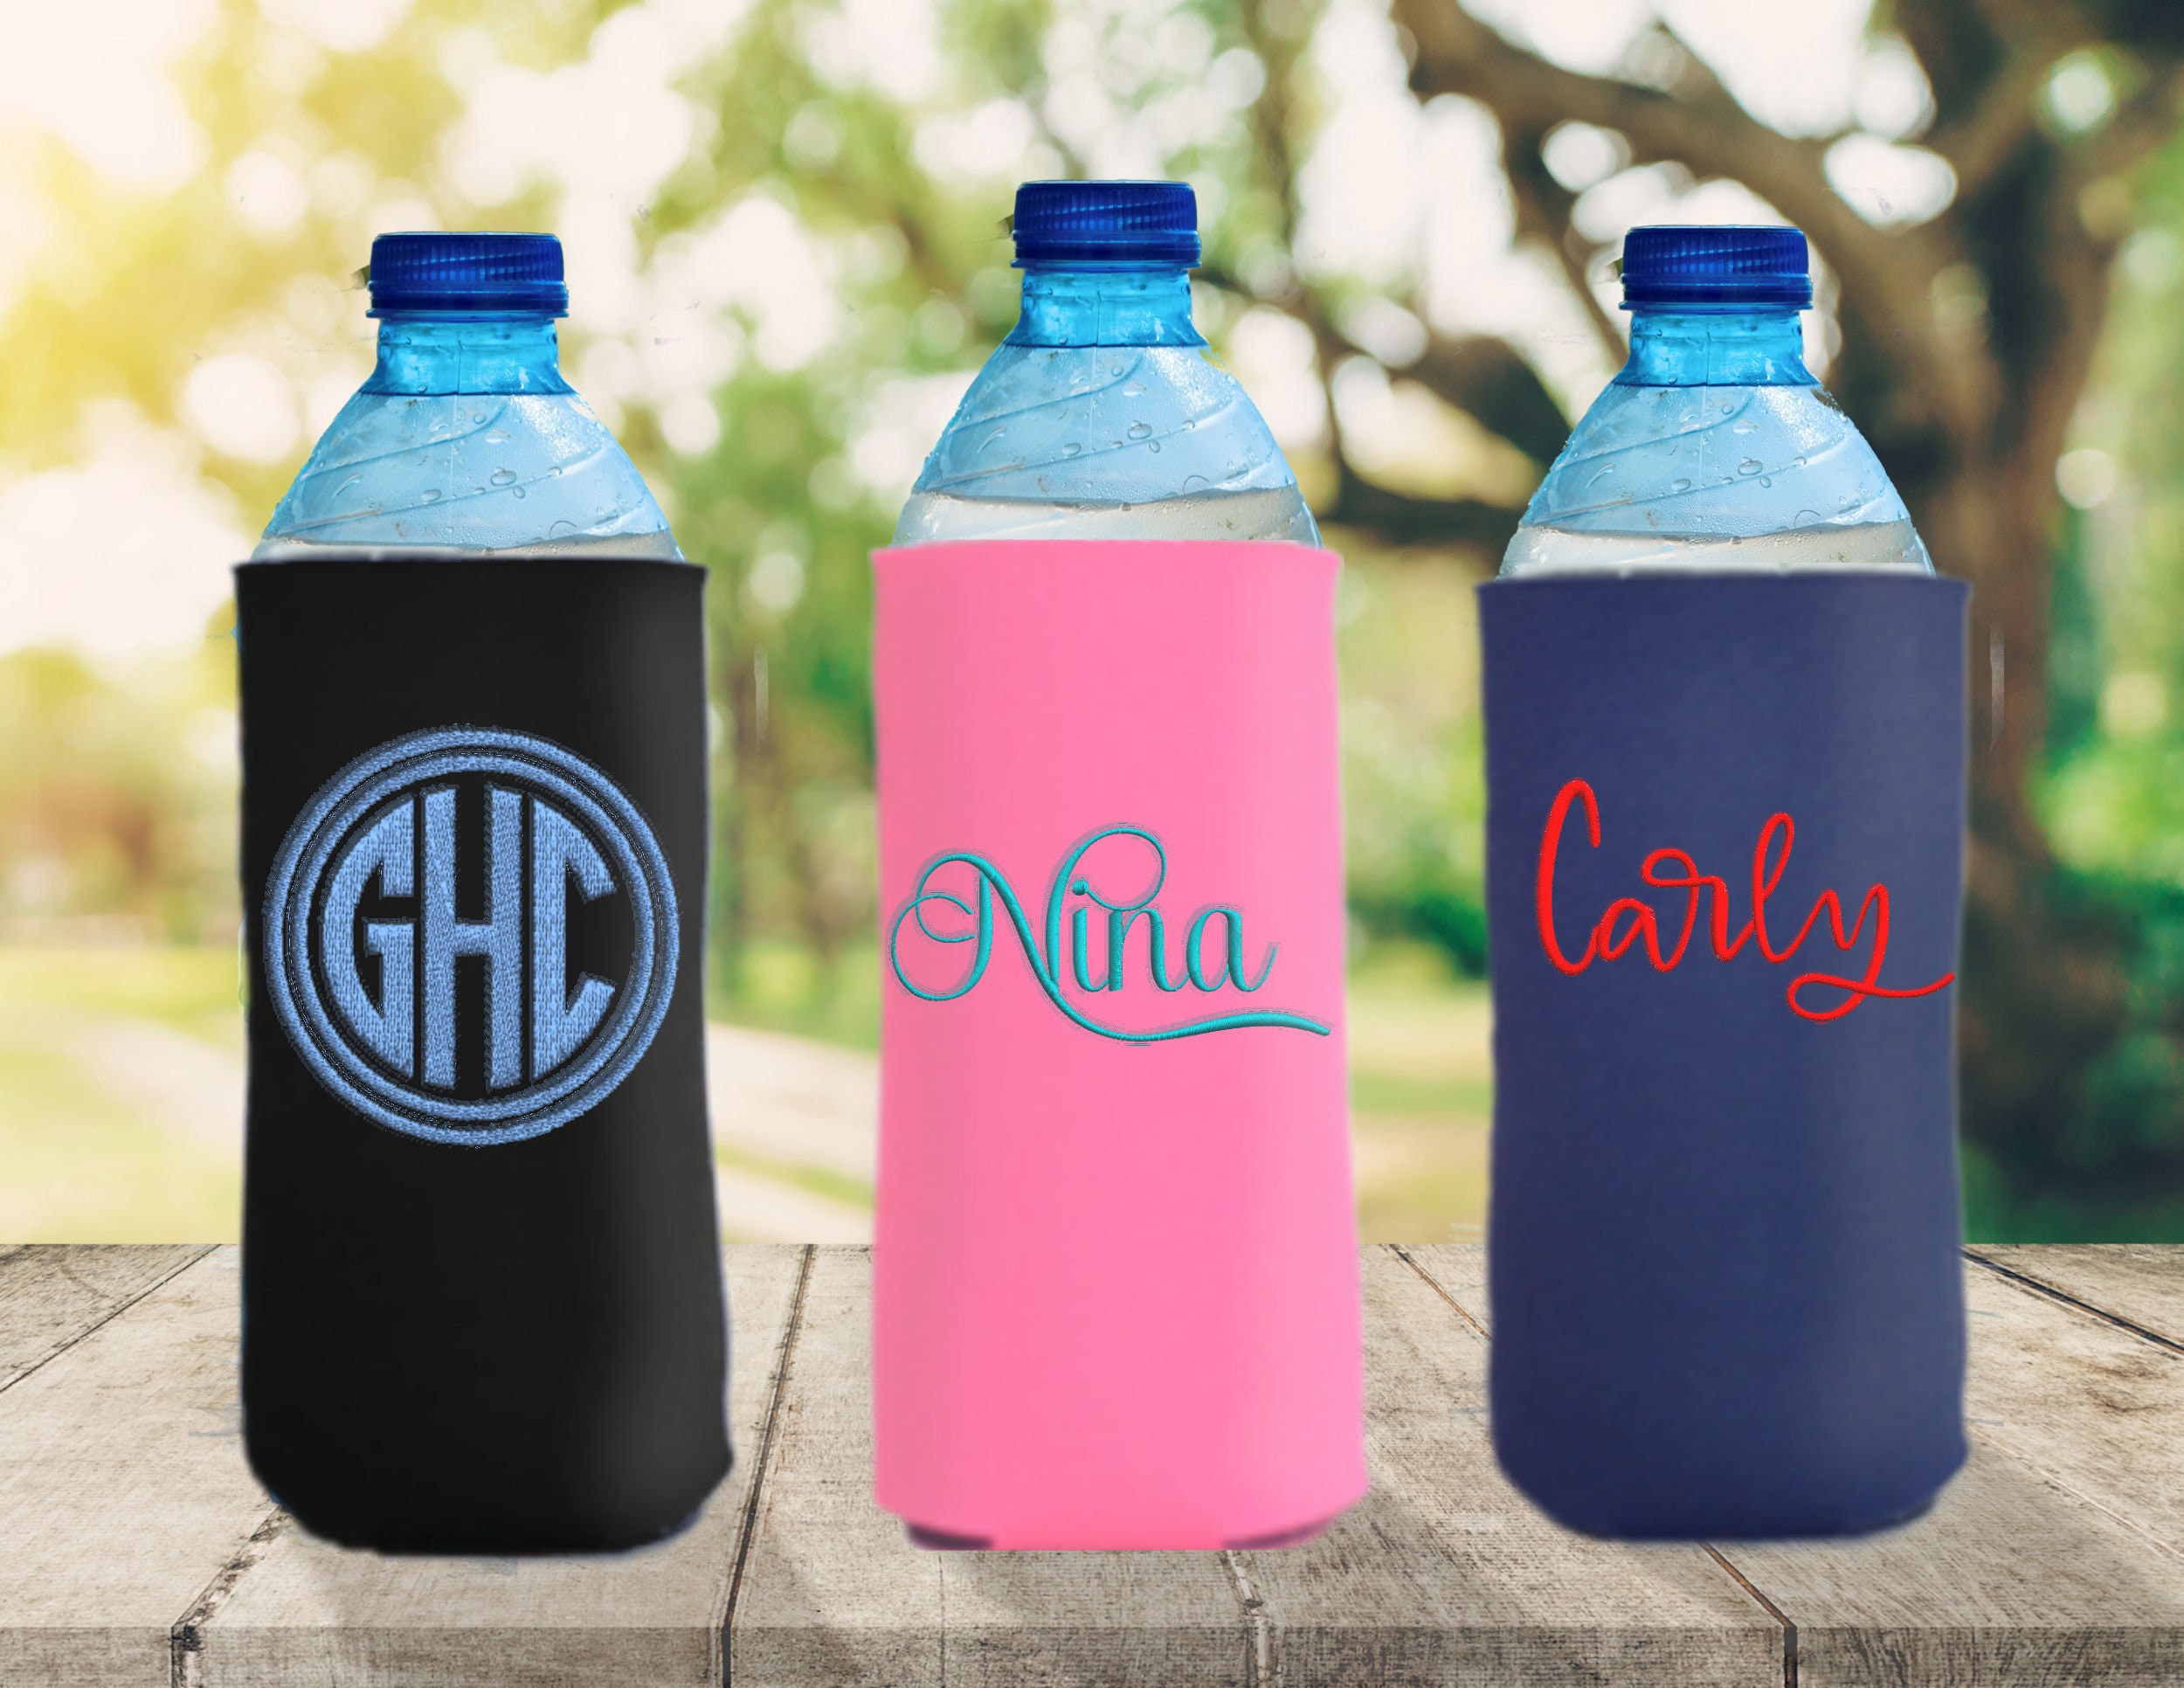 4 Pcs Reusable Water Bottle Coolie, Water Bottle Sleeve to Prevent